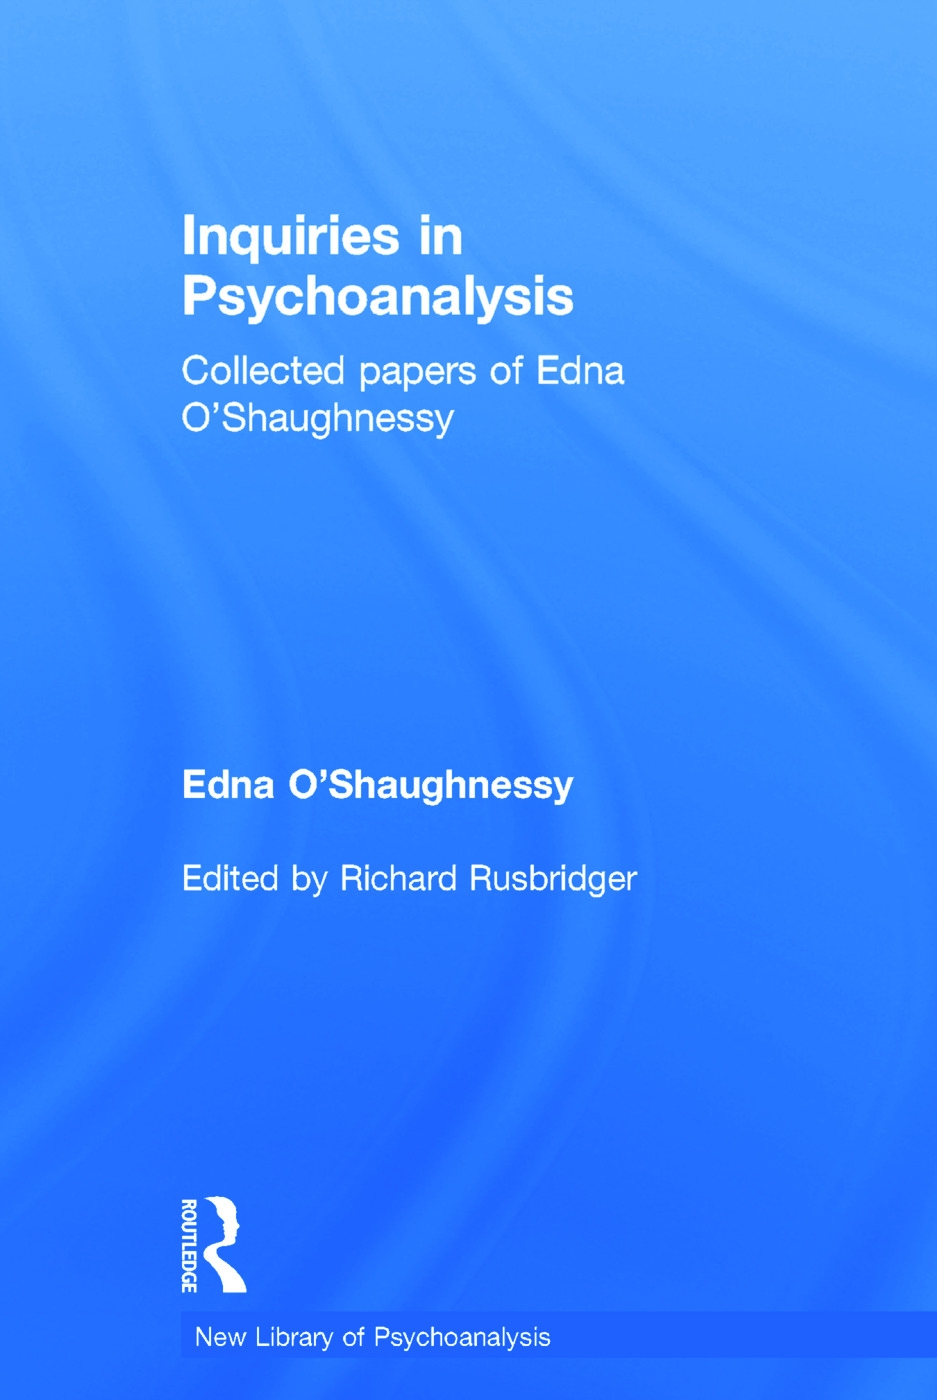 Inquiries in Psychoanalysis: Collected Papers of Edna O’Shaughnessy